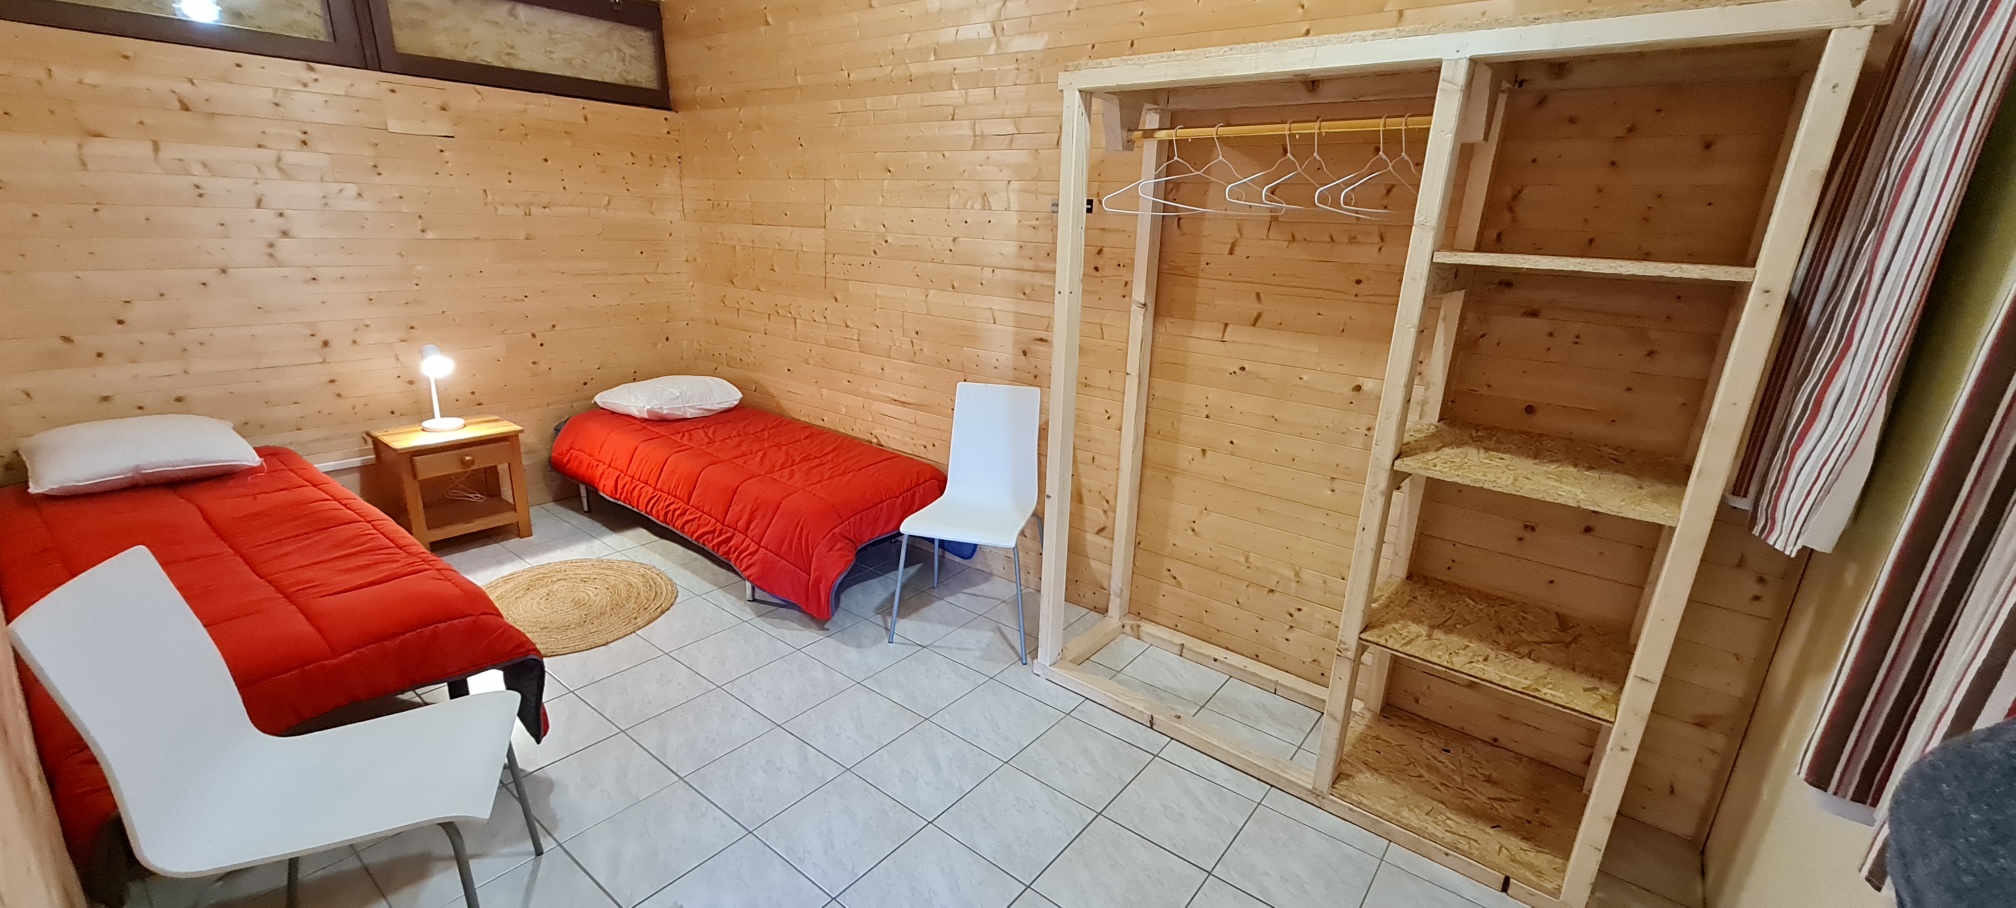 Bedroom - Room No. 401-2/ Overnight Accommodation For Hikers: 2 Single Beds. 15Pm/10Am - Camping Pré Rolland